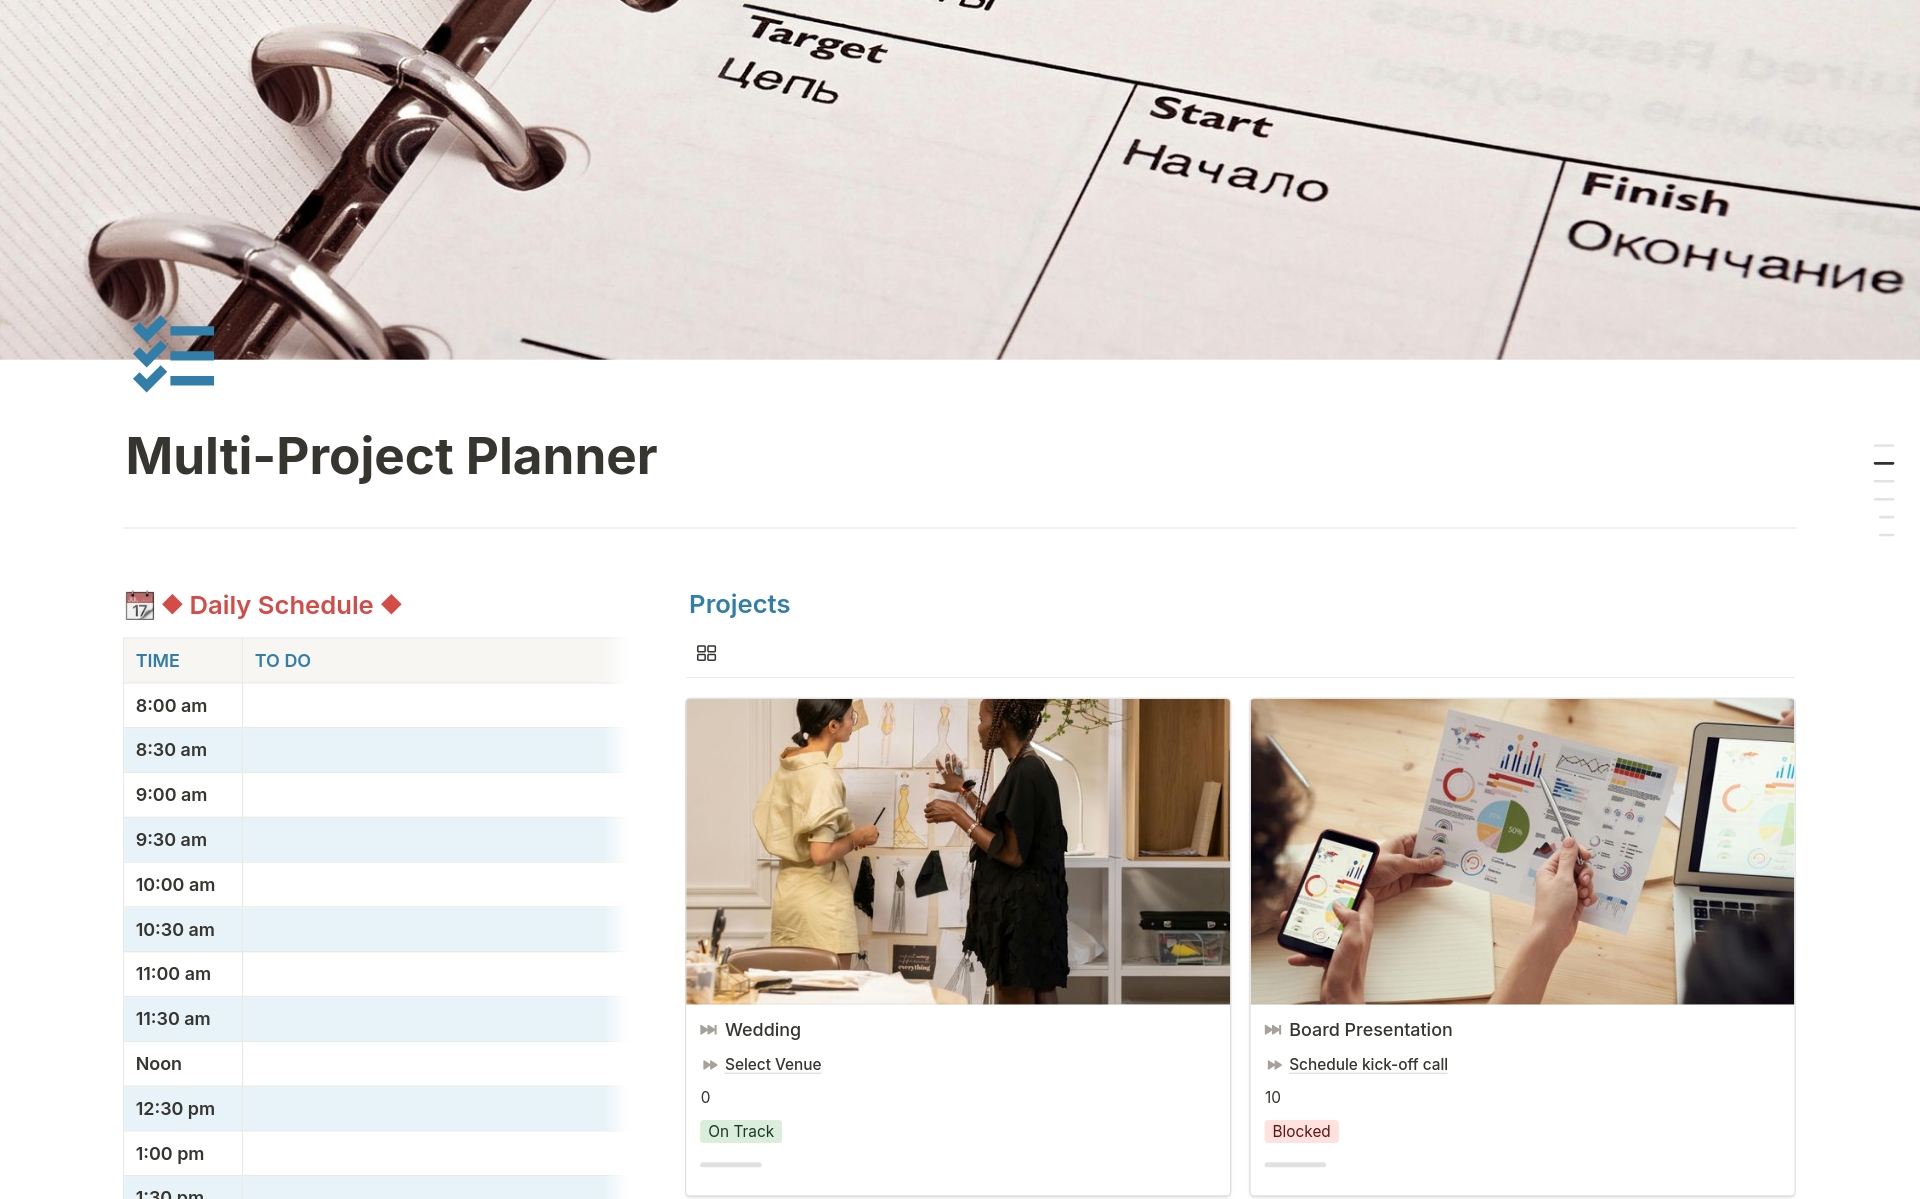 Managing a projects with multiple milestones and priorities? Check out this powerful and elegant project manager. It includes a daily schedule, prioritization, dependancy gant chart, status tracking, and more. Even better, each project and milestone includes a dashboard view. 